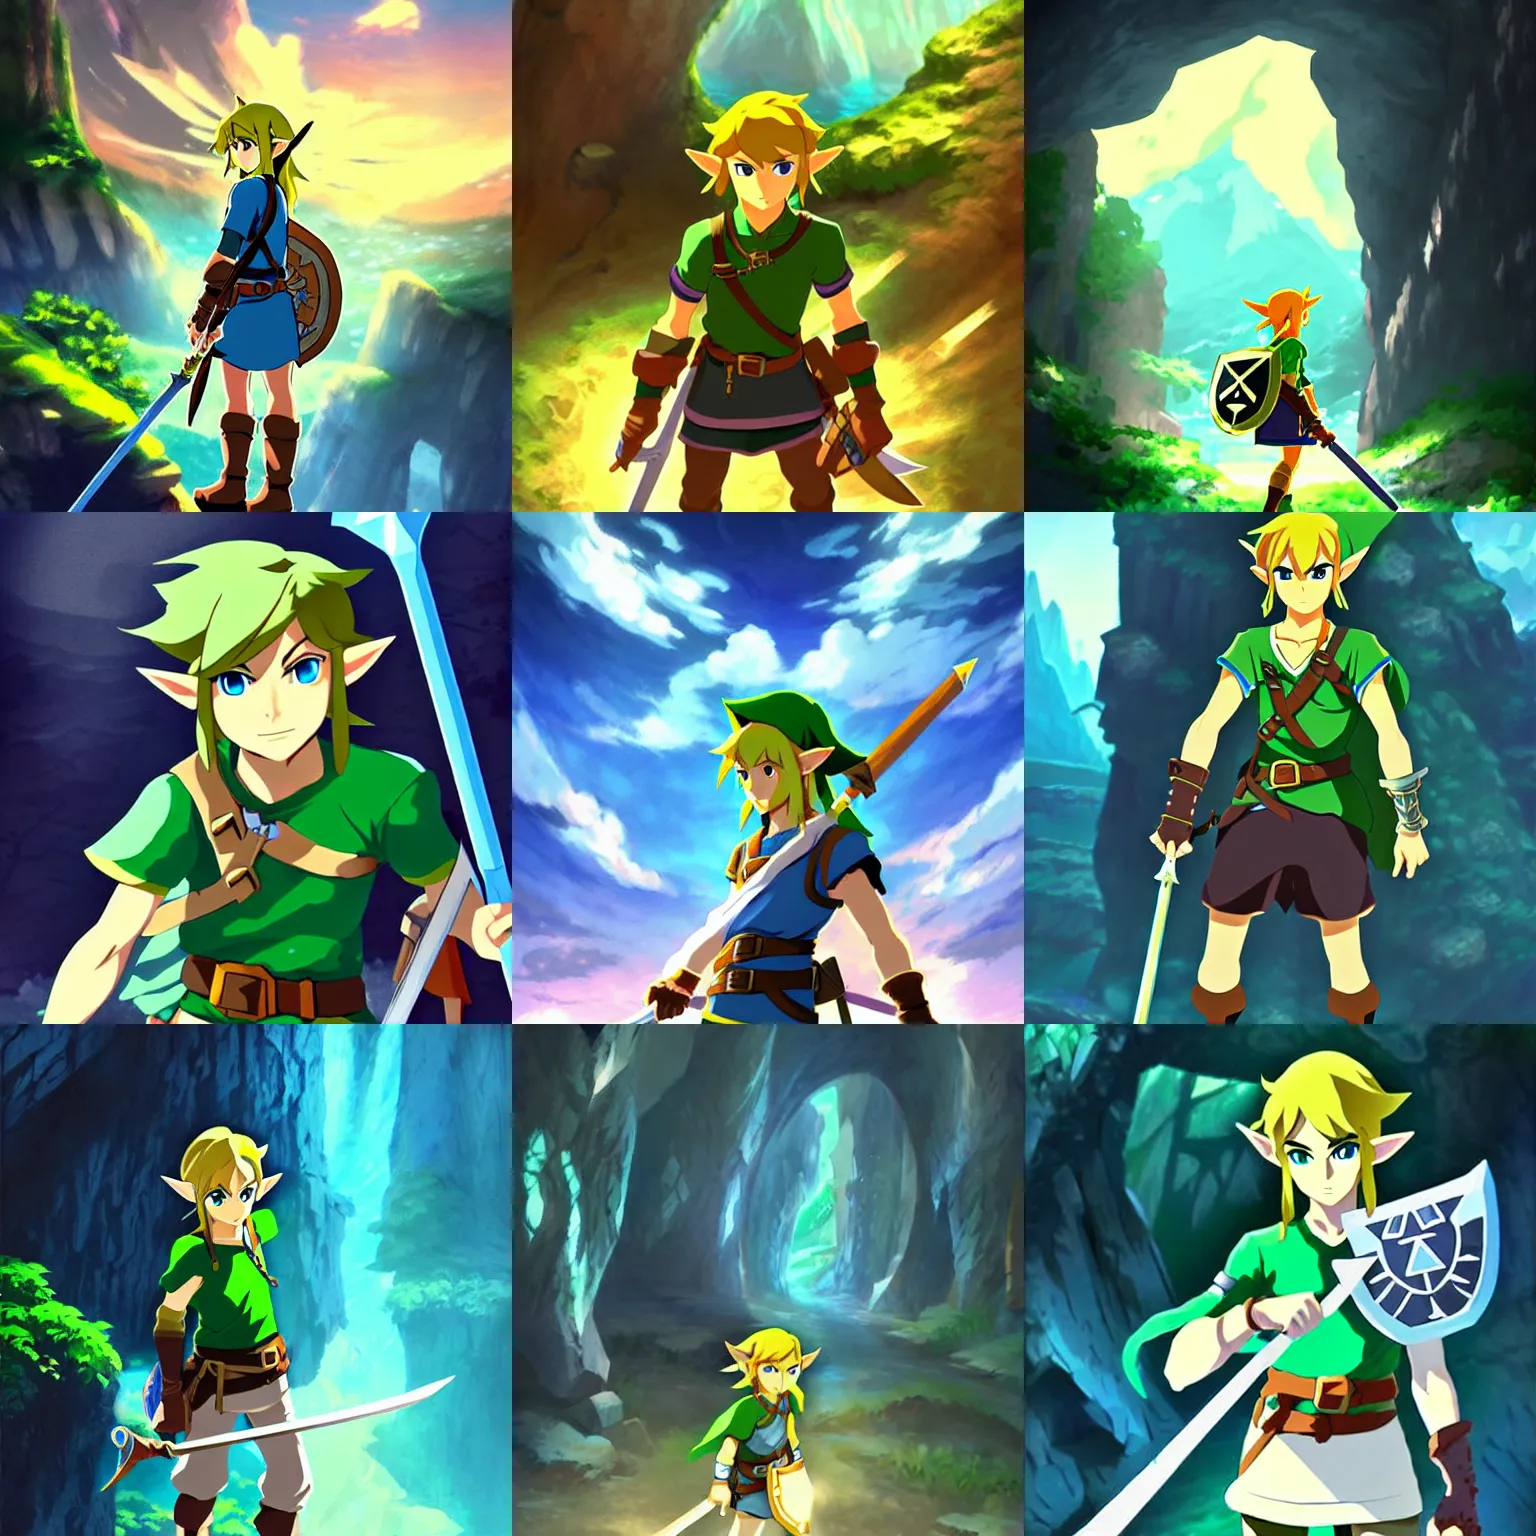 Prompt: link in a cave, legend of zelda, mature, dungeons and dragons, in the anime style of makoto shinkai, key art